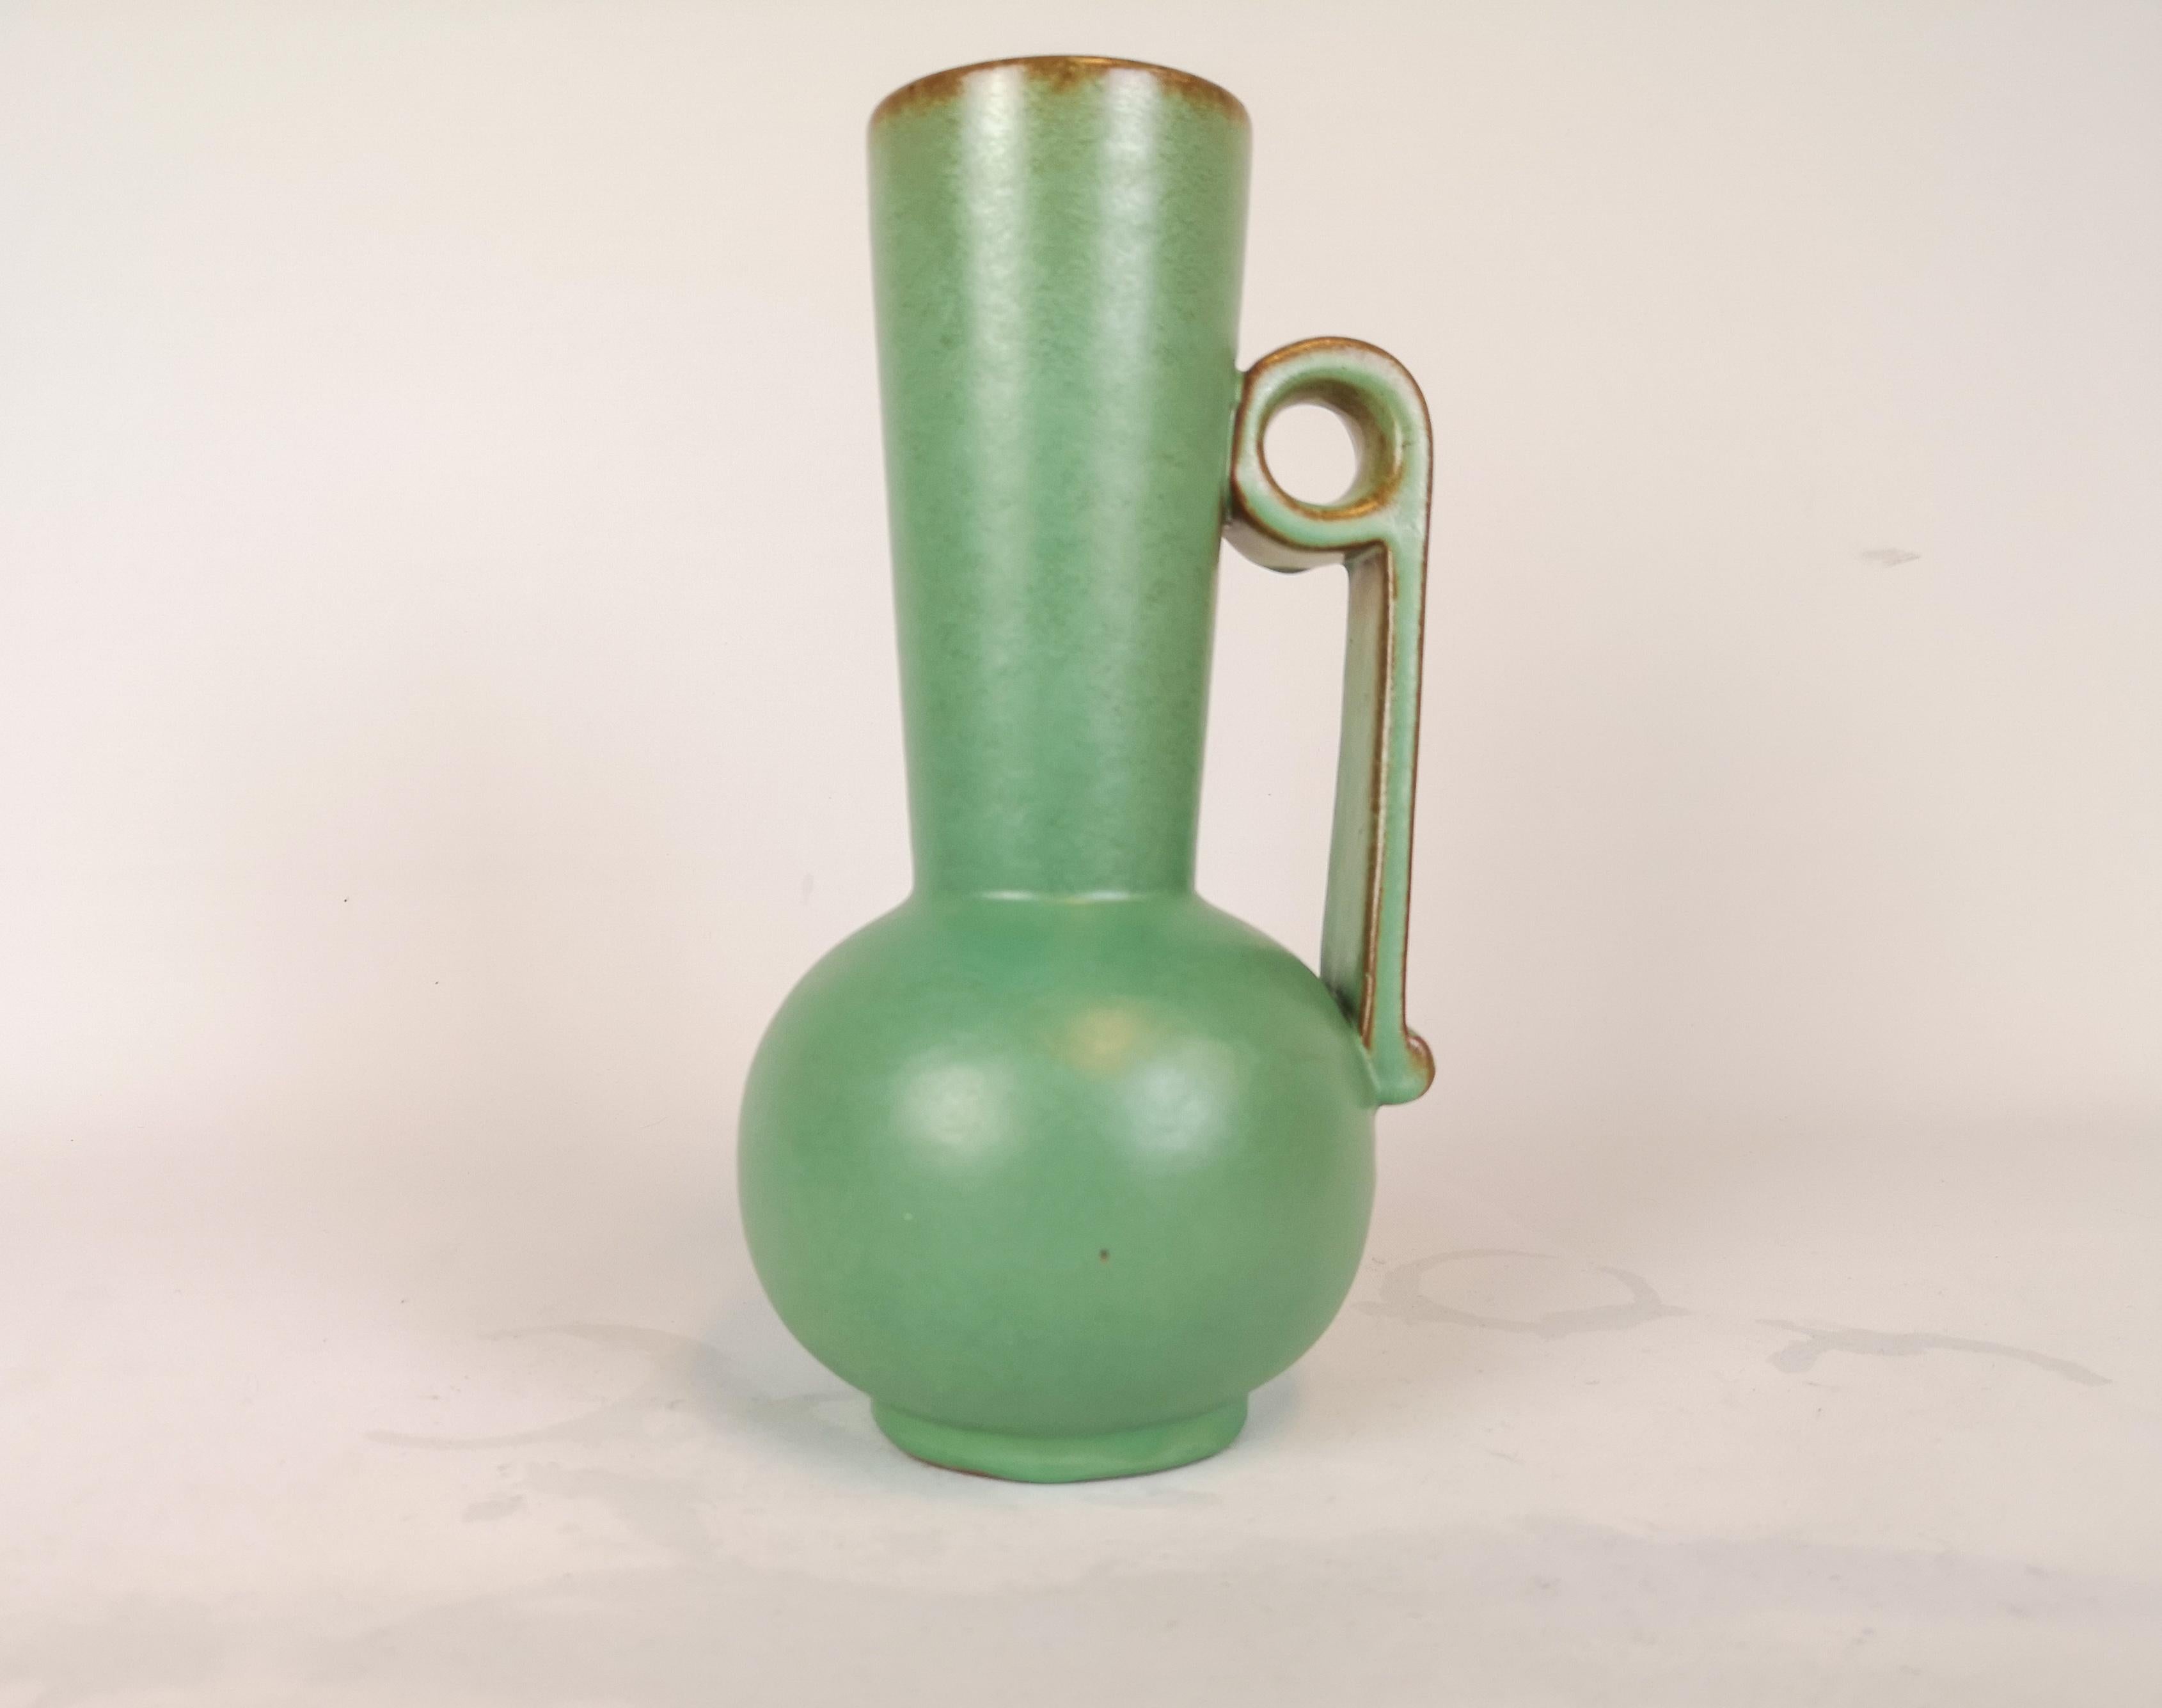 Ceramic Collection of Green Art Deco Pieces Made in Sweden, 1930s-1940s